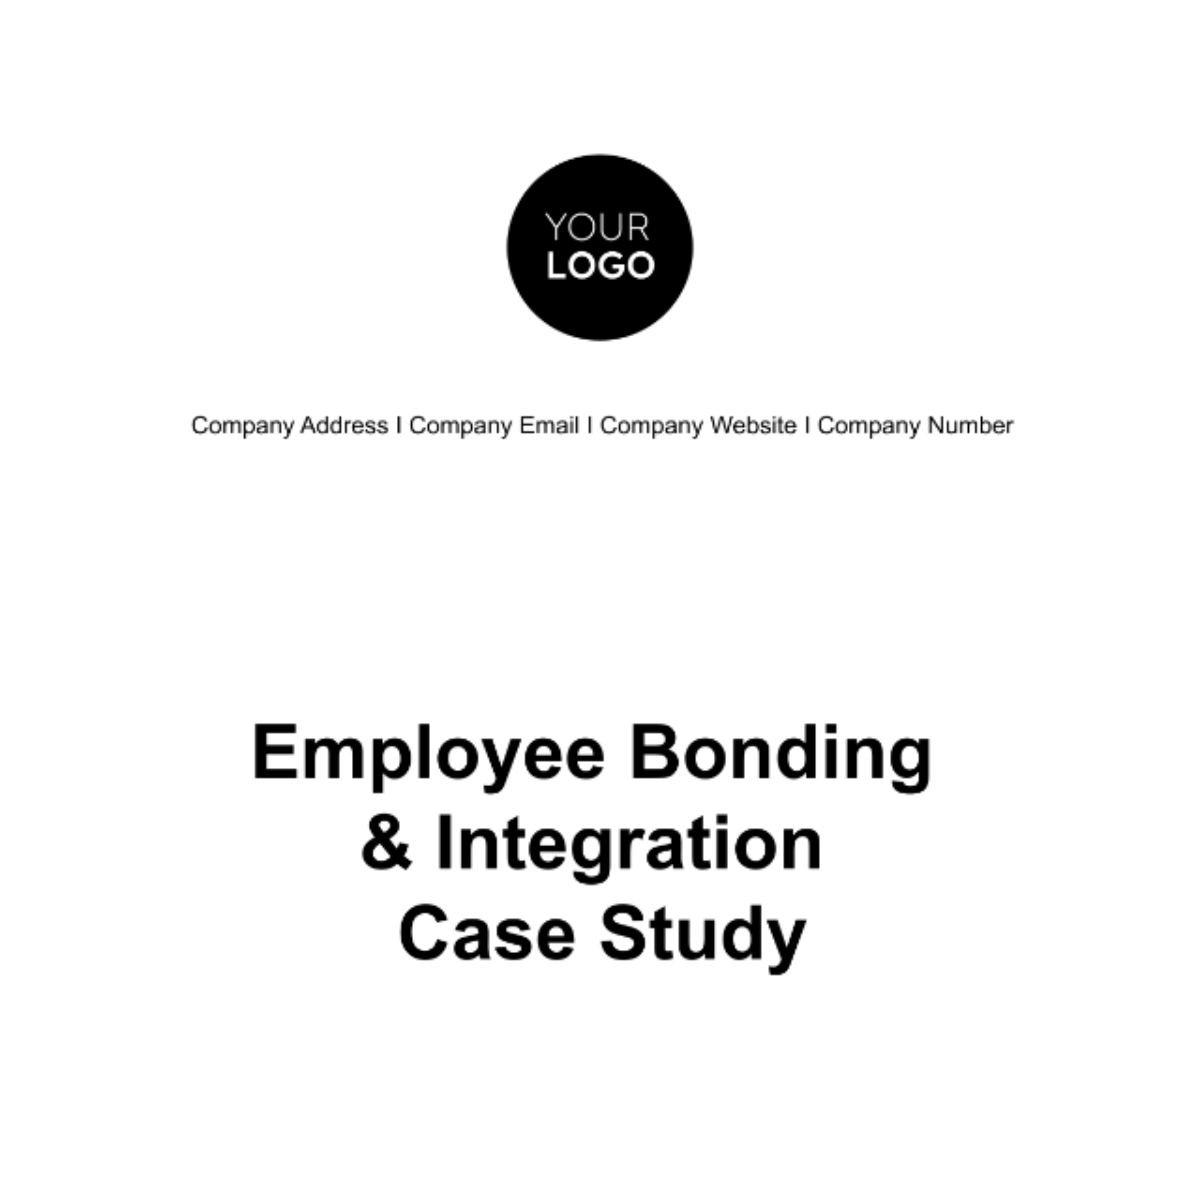 Free Employee Bonding and Integration Case Study HR Template